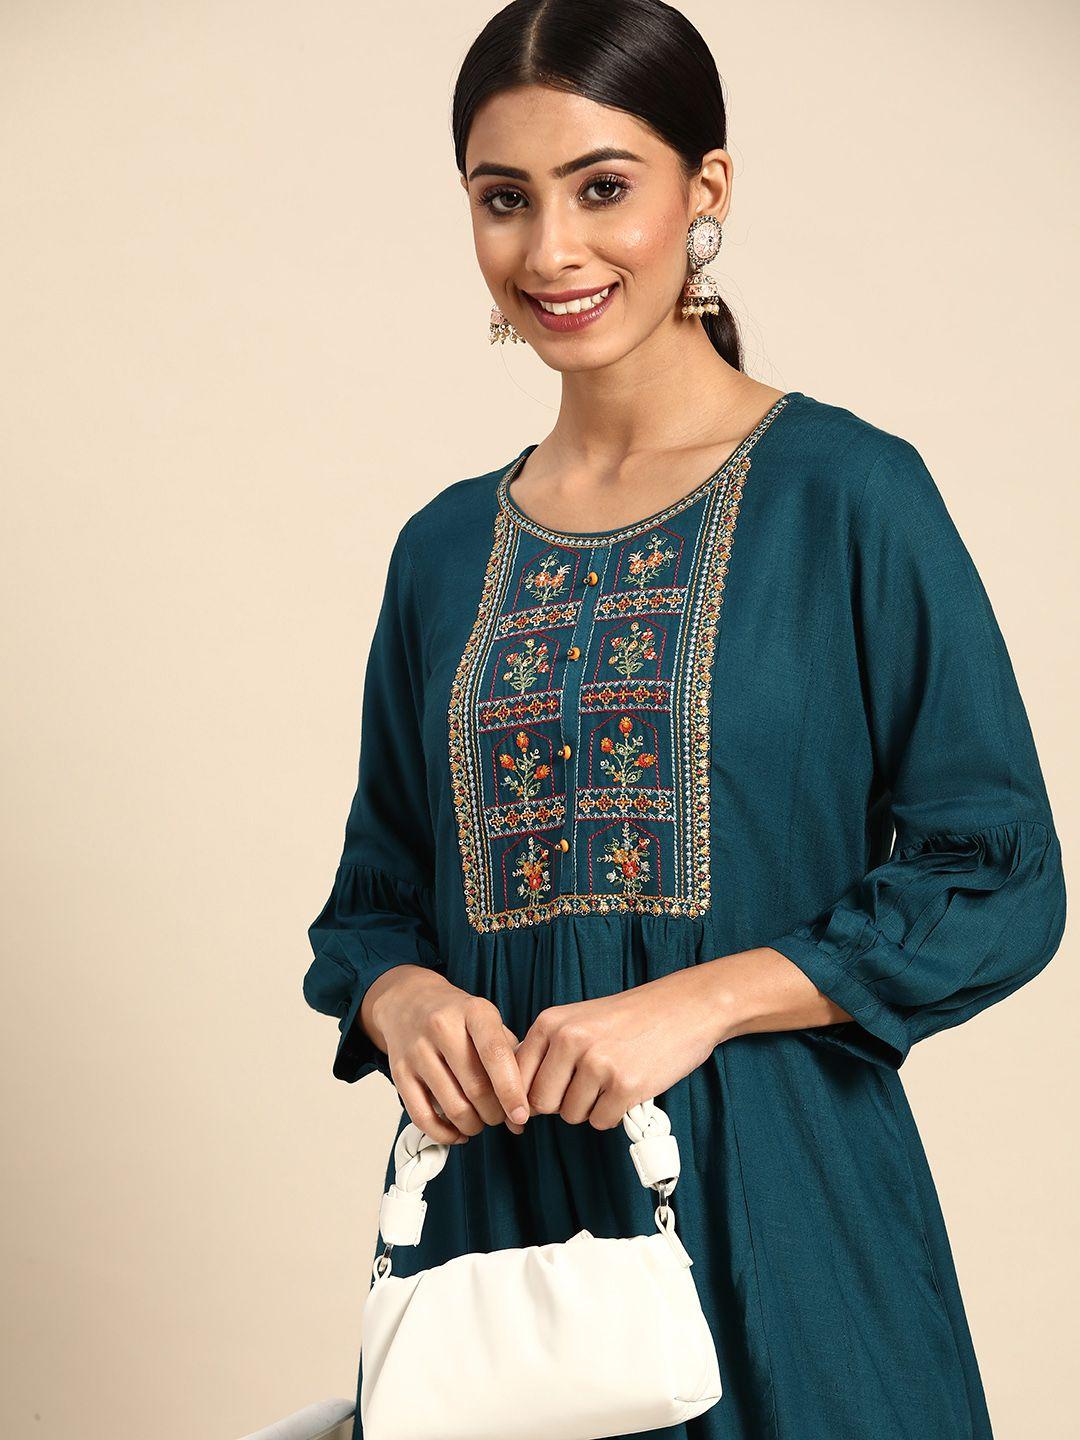 Sangria Teal Blue Floral Embroidered Pleated A-Line Top